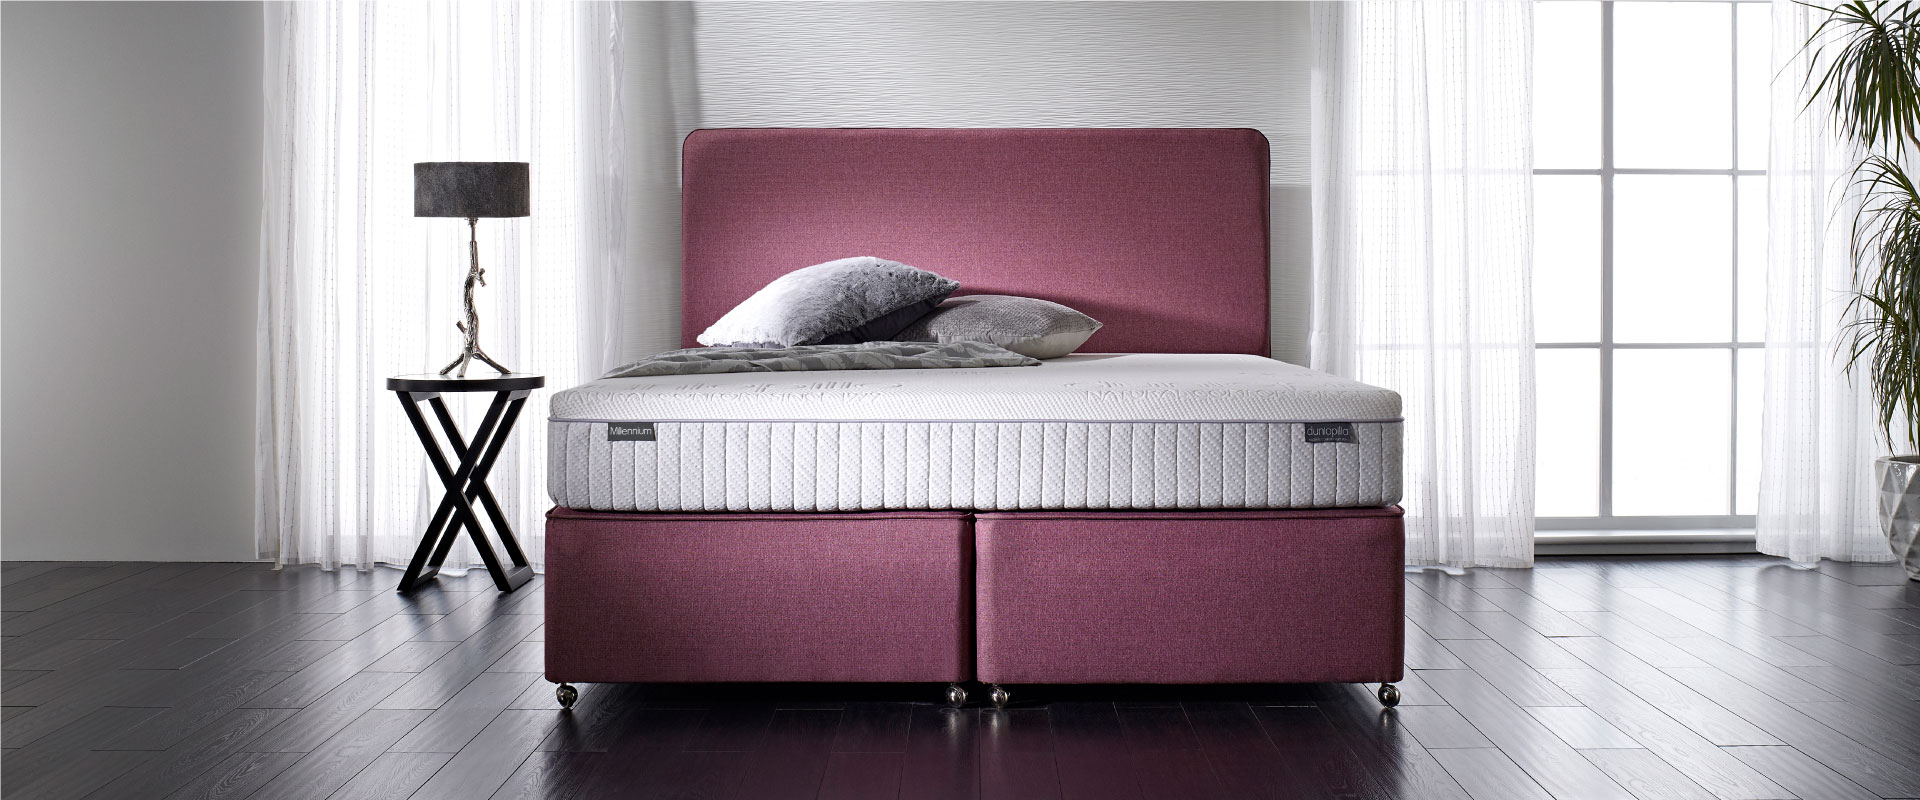 Dunlopillo Bed Review and Analysis